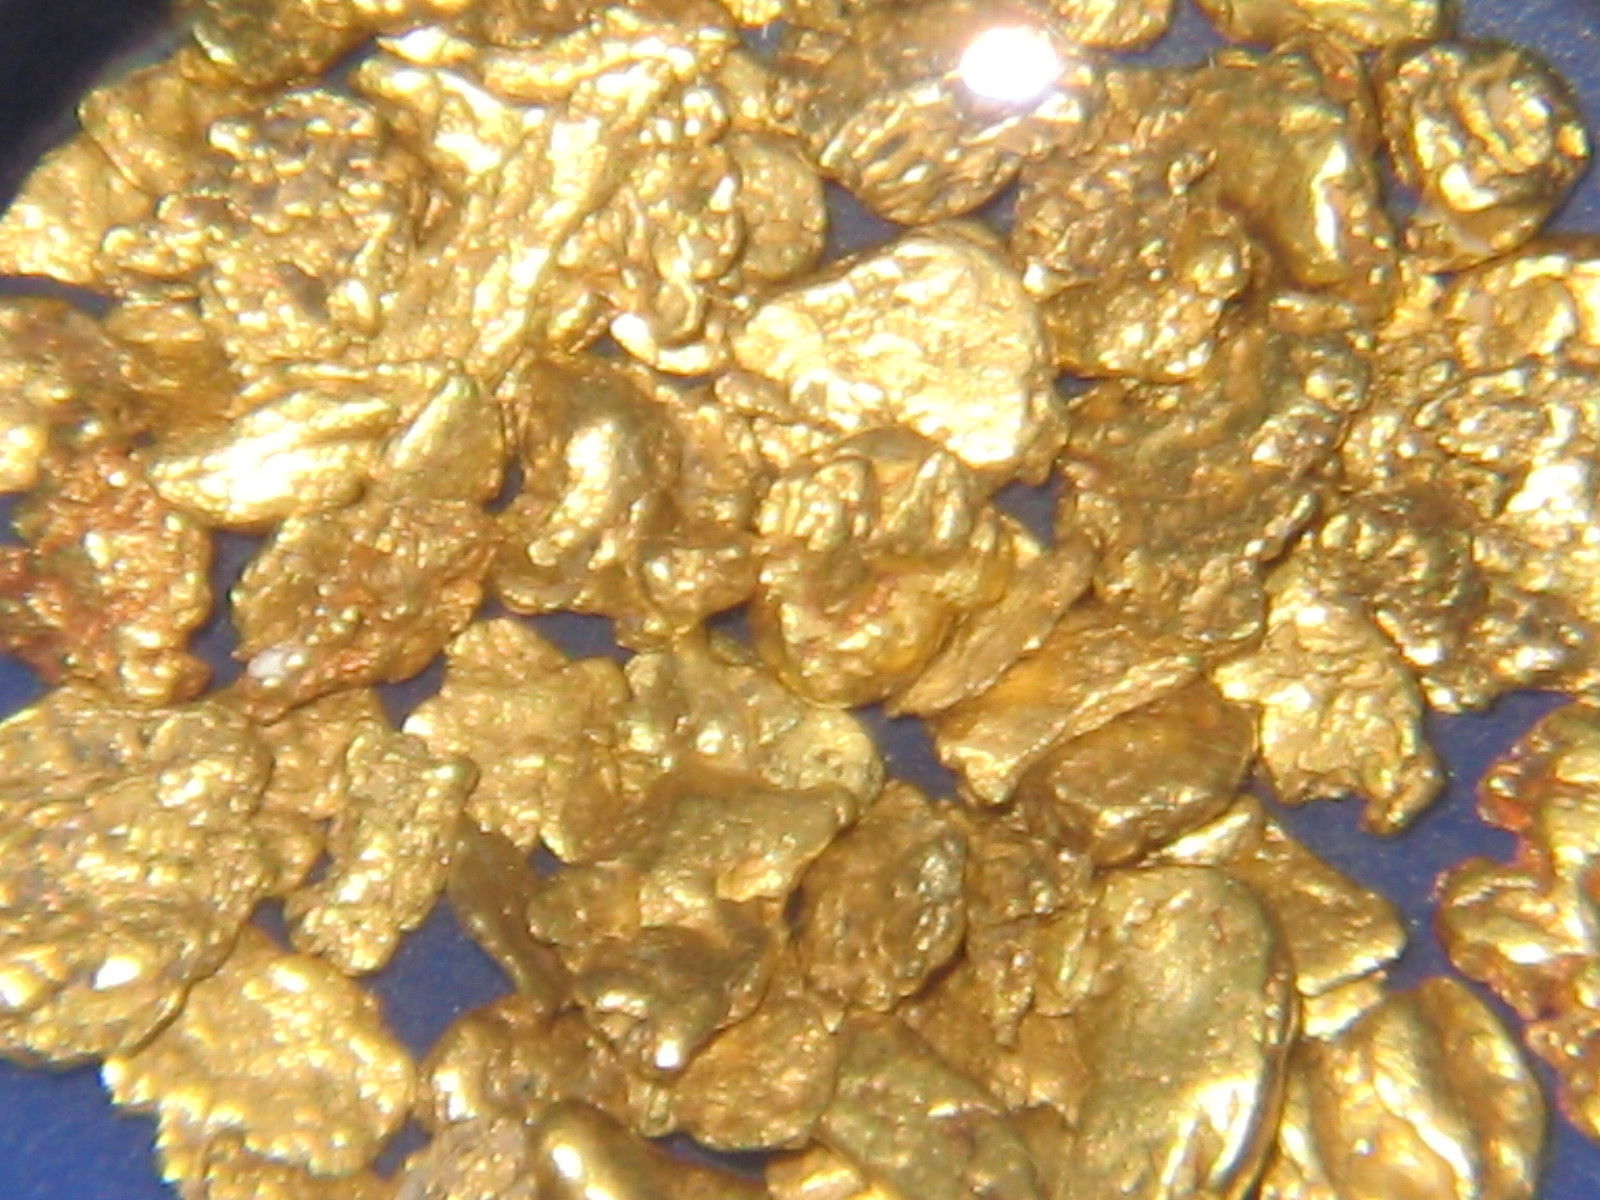 2 Lb. Rich Gold Paydirt Concentrates Unsearched Pay Streak Prospecting